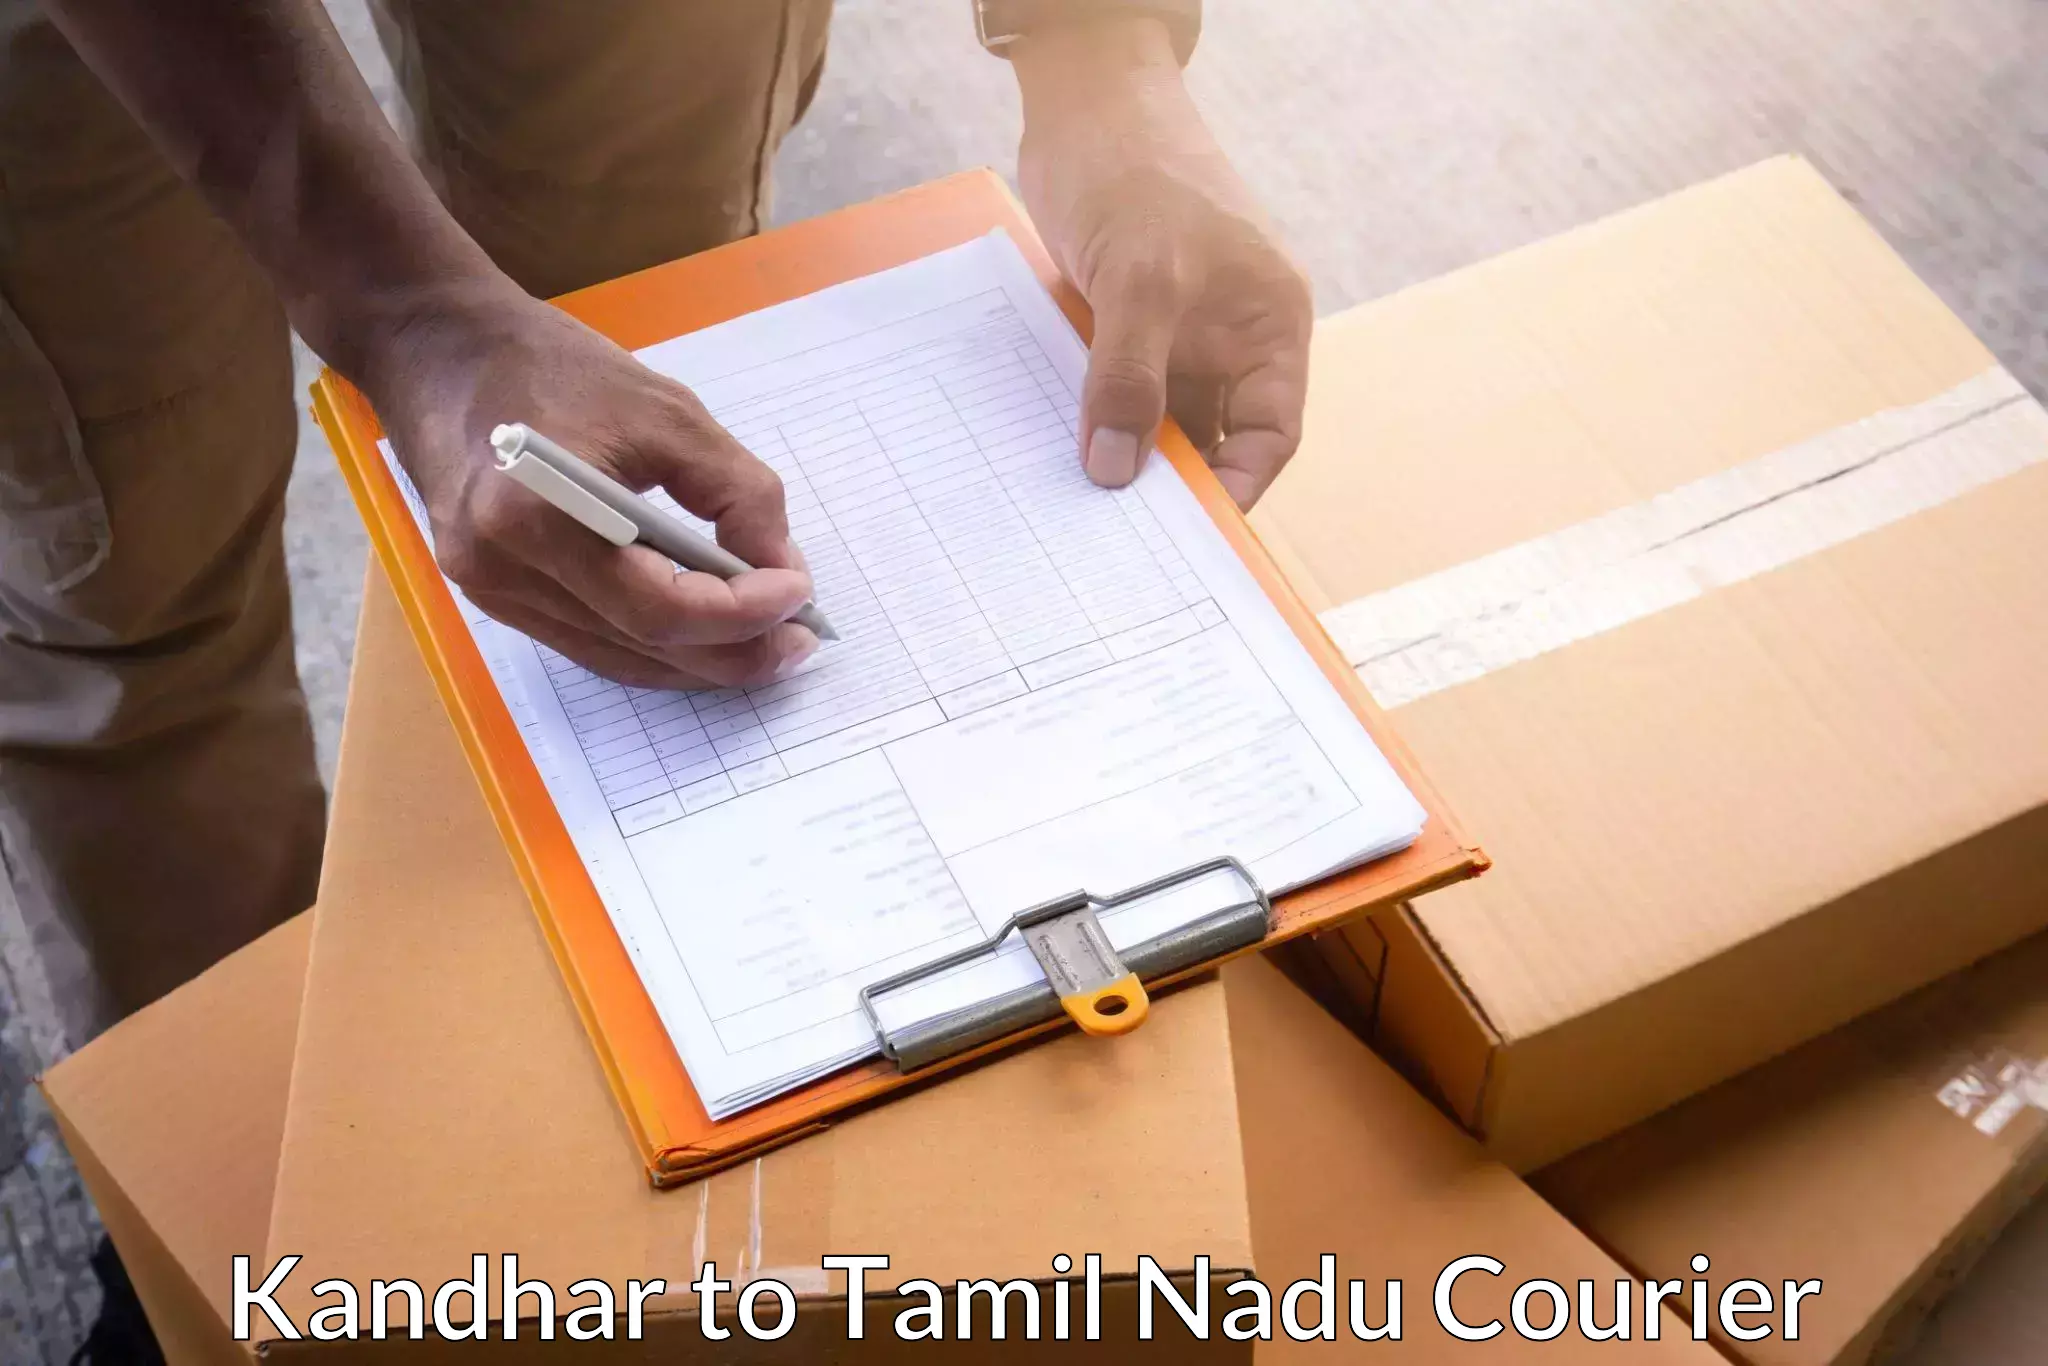 Flexible delivery scheduling in Kandhar to Karur